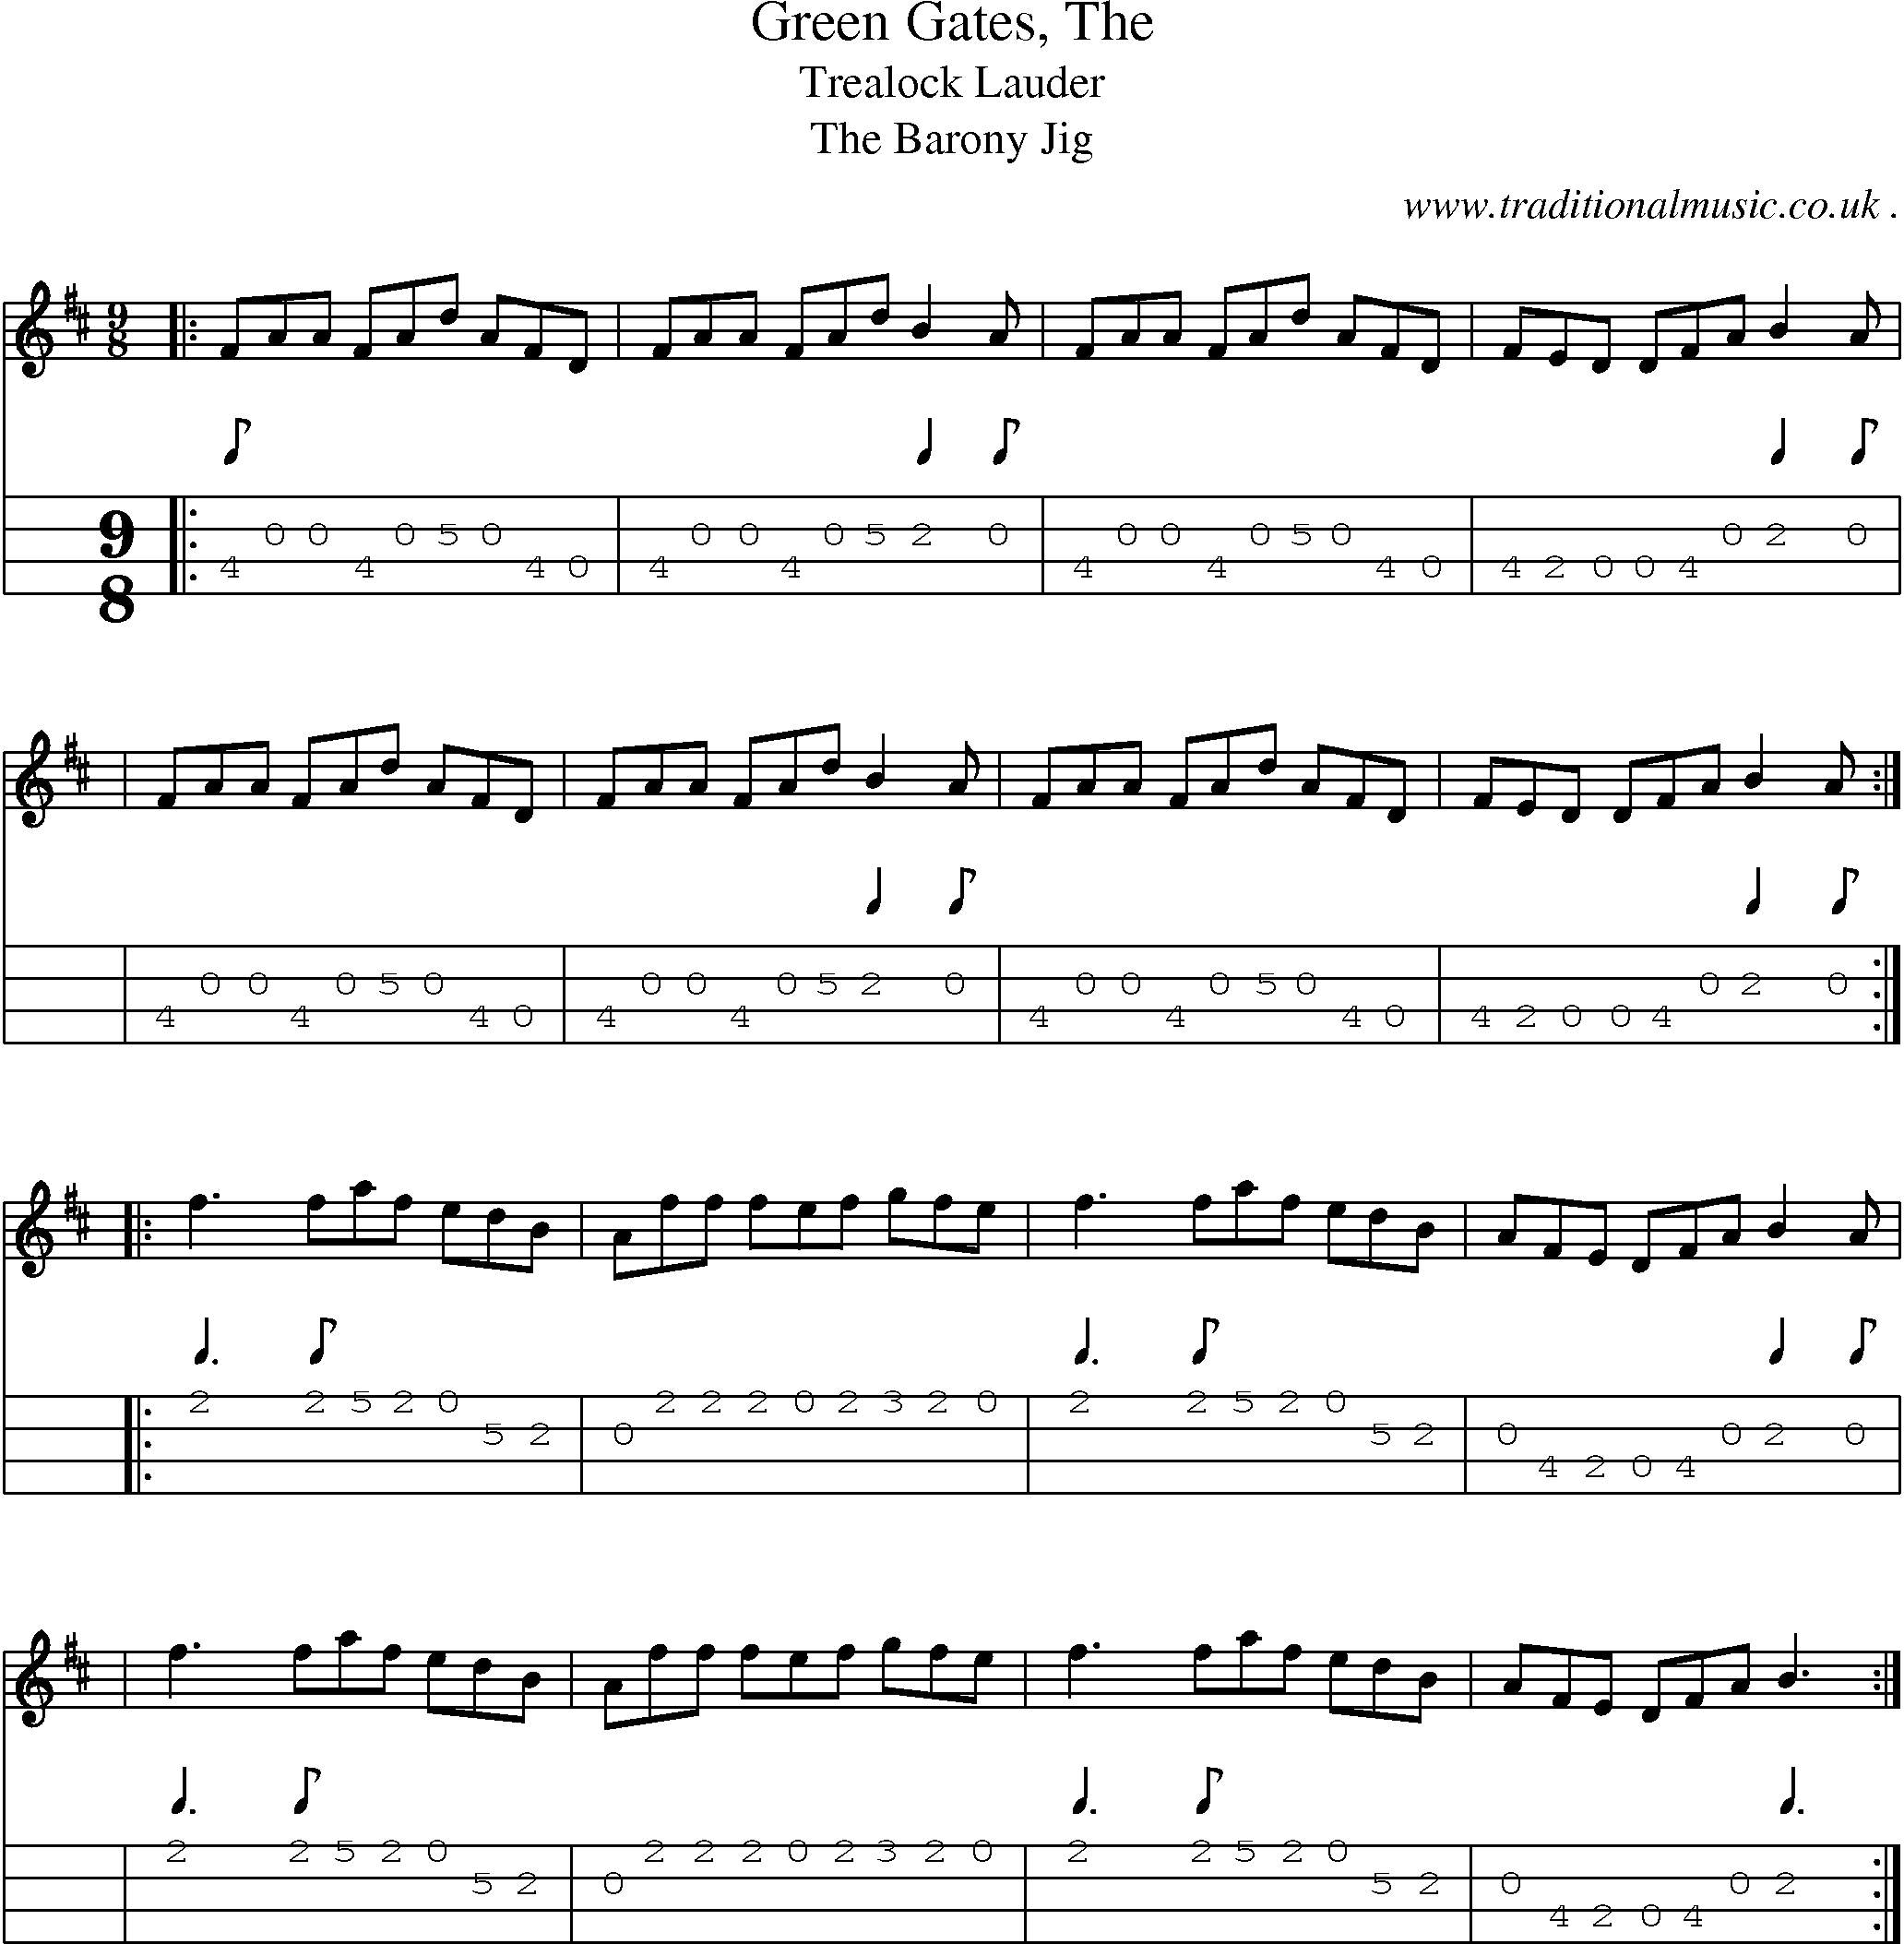 Sheet-music  score, Chords and Mandolin Tabs for Green Gates The